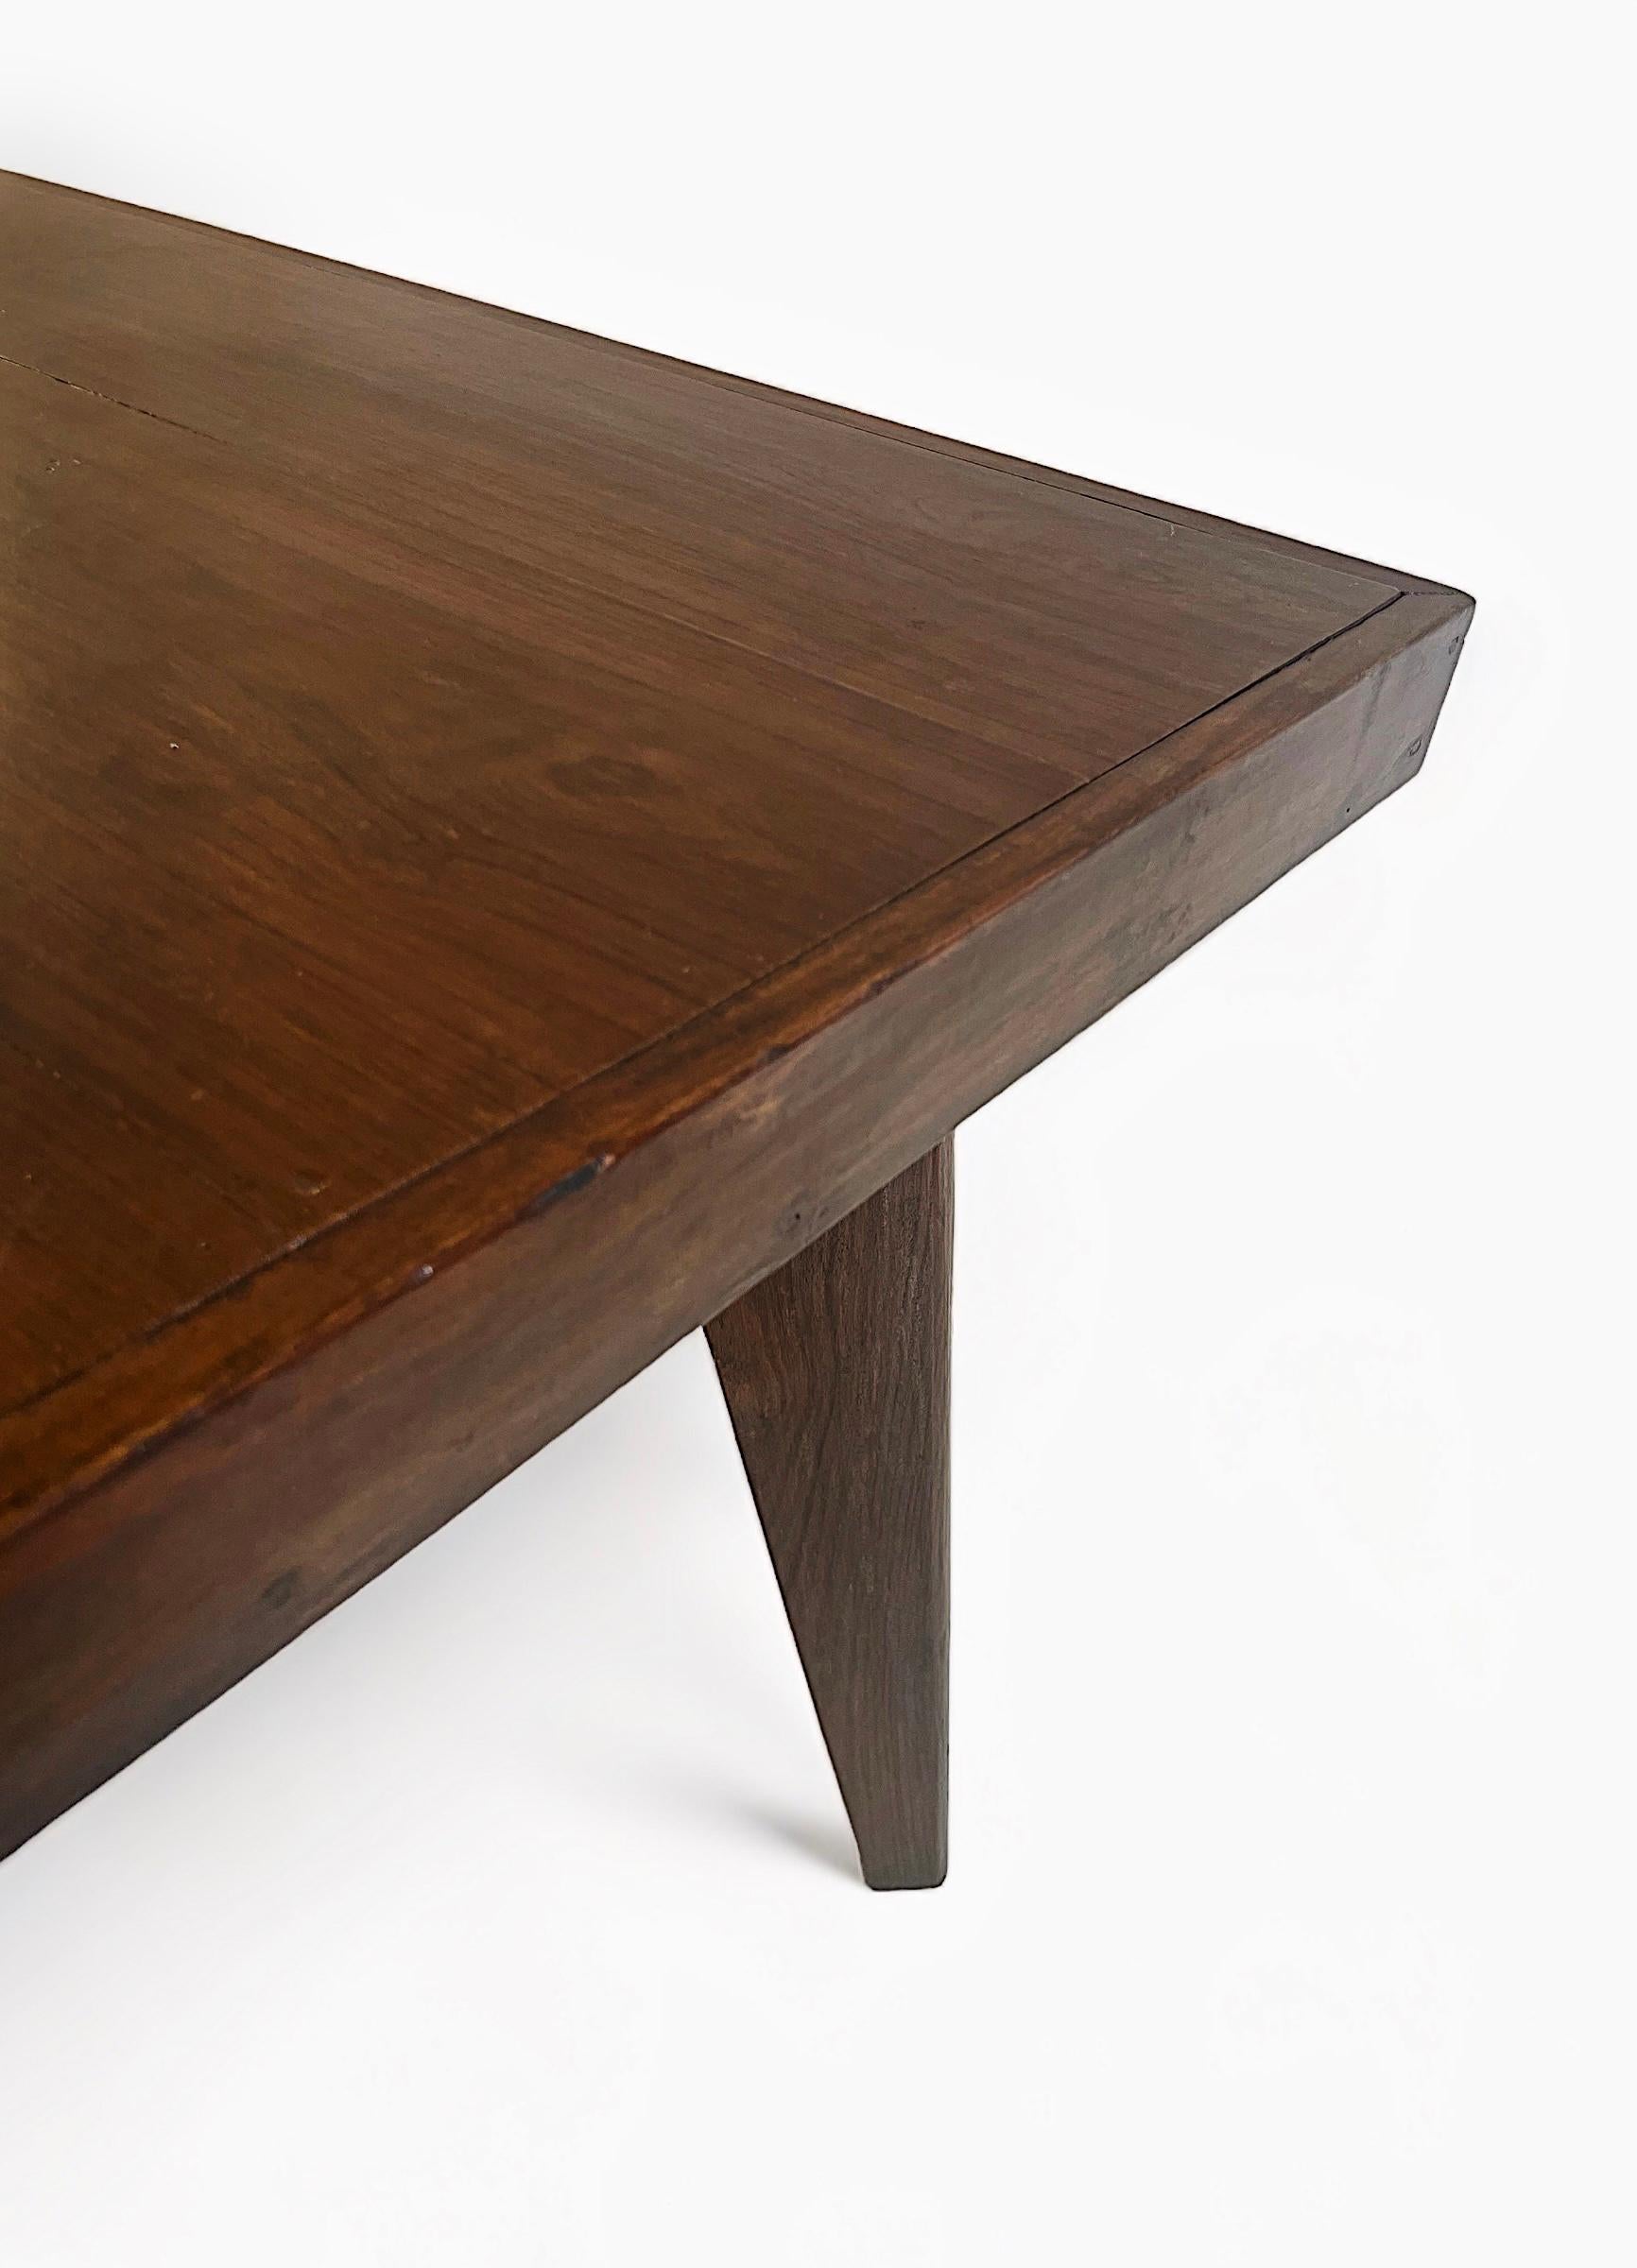 Pierre Jeanneret Rosewood Table PJ-TA-01-A In Good Condition For Sale In New York, NY